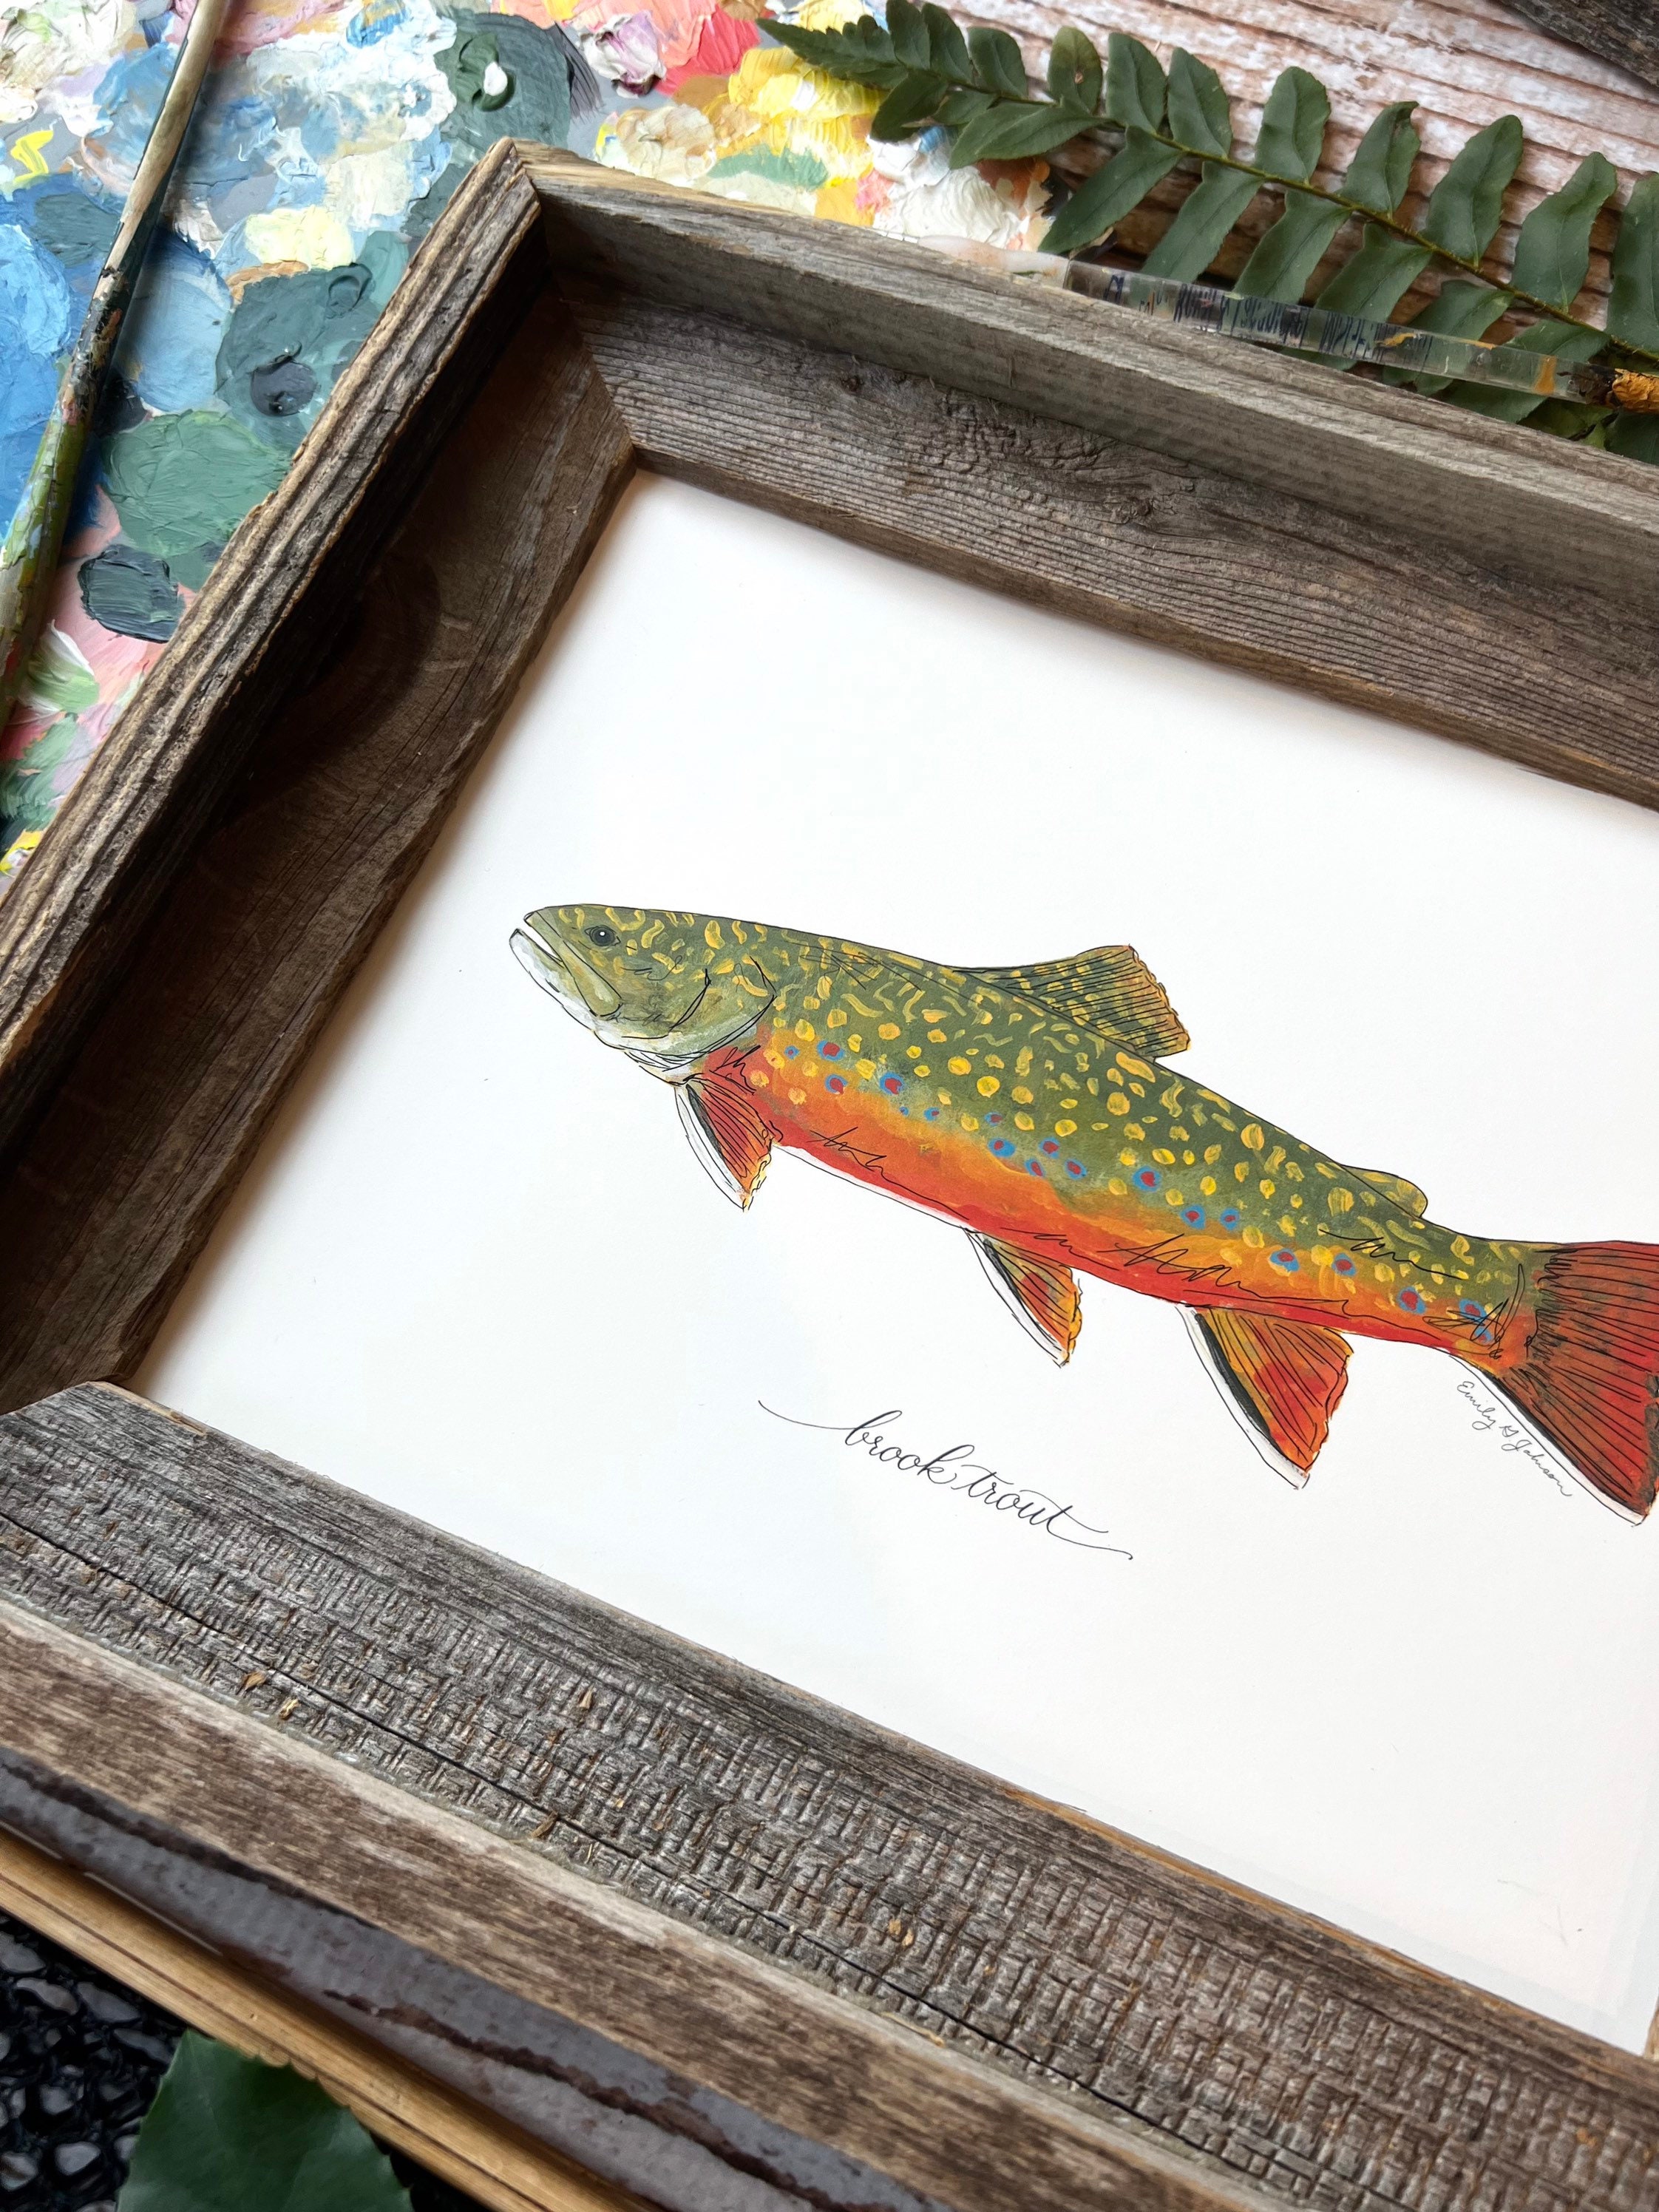 BROOK TROUT, Fish, Freshwater Fish, Fish Painting, Trout Painting